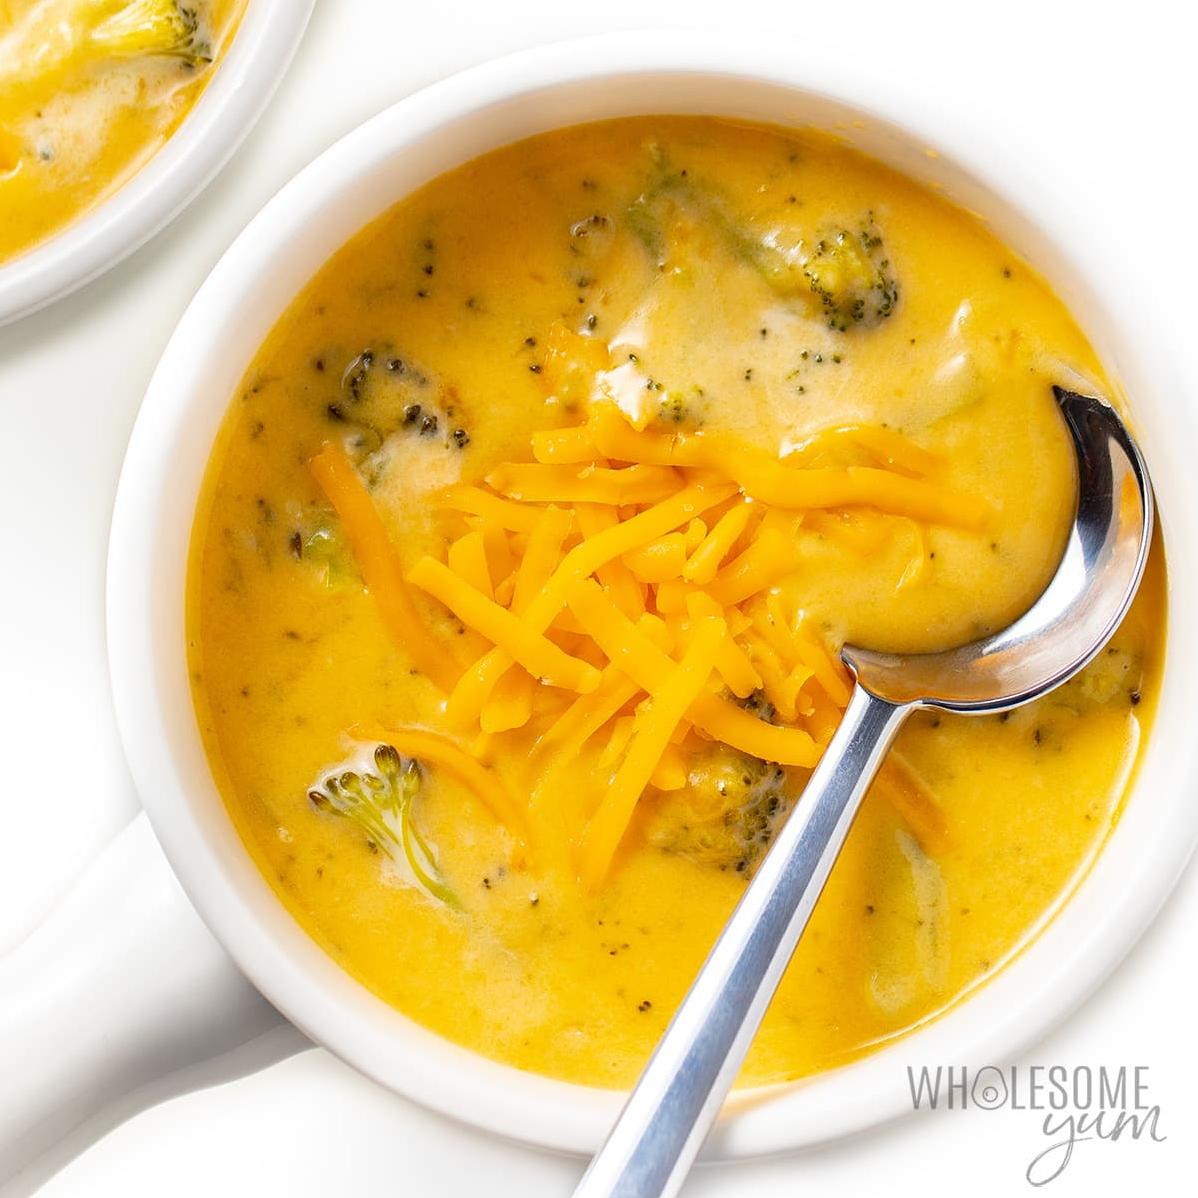  Soup season just got better with this delicious recipe